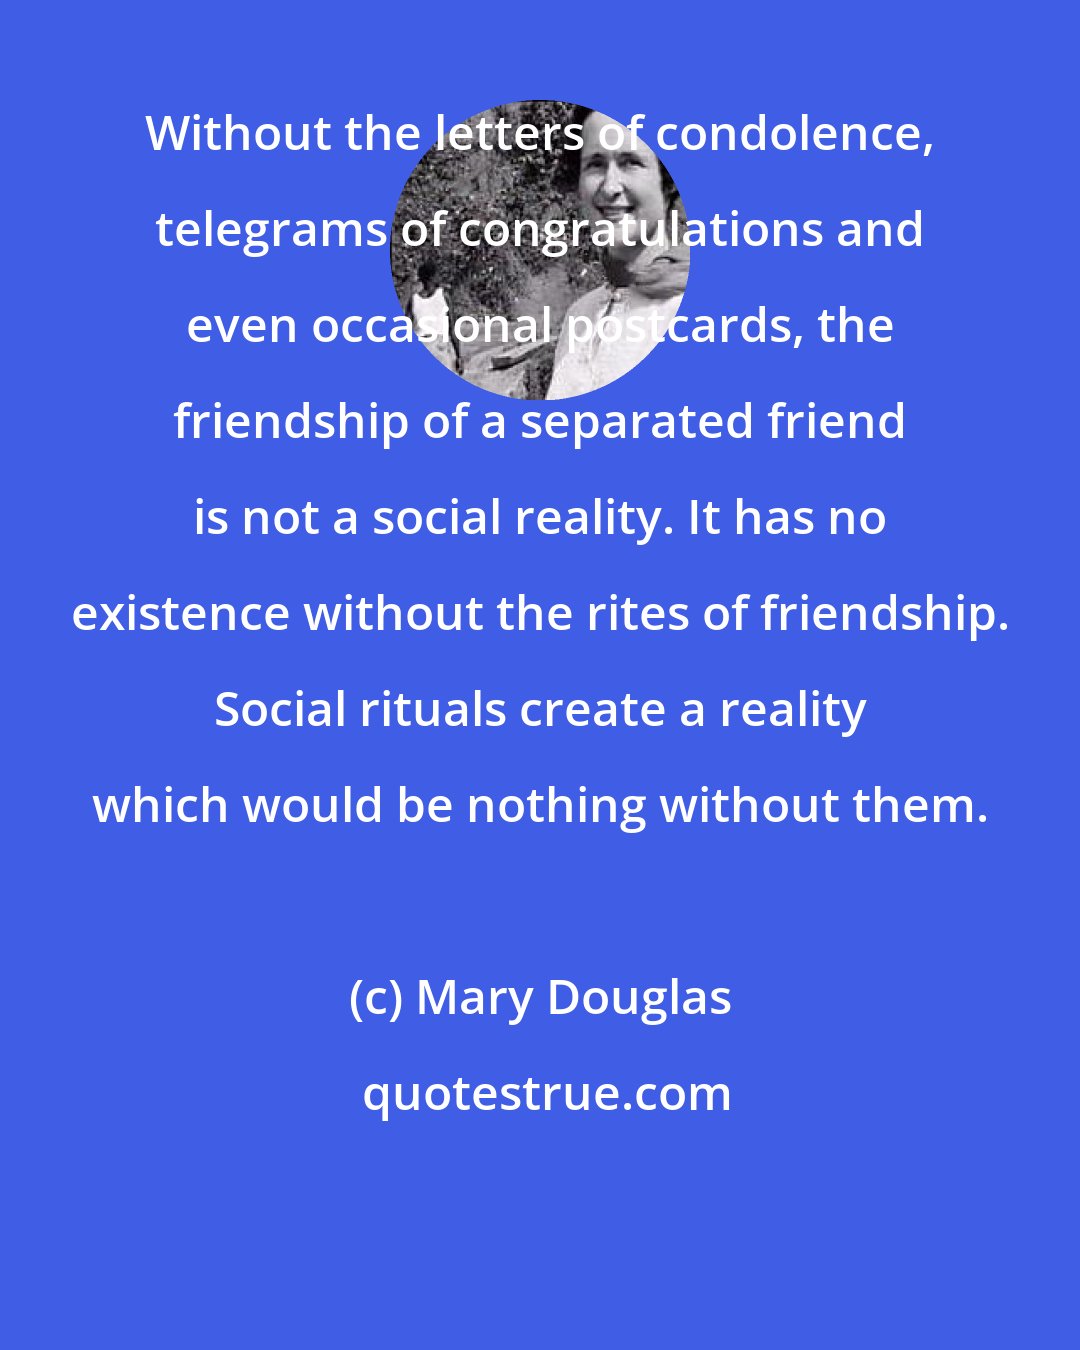 Mary Douglas: Without the letters of condolence, telegrams of congratulations and even occasional postcards, the friendship of a separated friend is not a social reality. It has no existence without the rites of friendship. Social rituals create a reality which would be nothing without them.